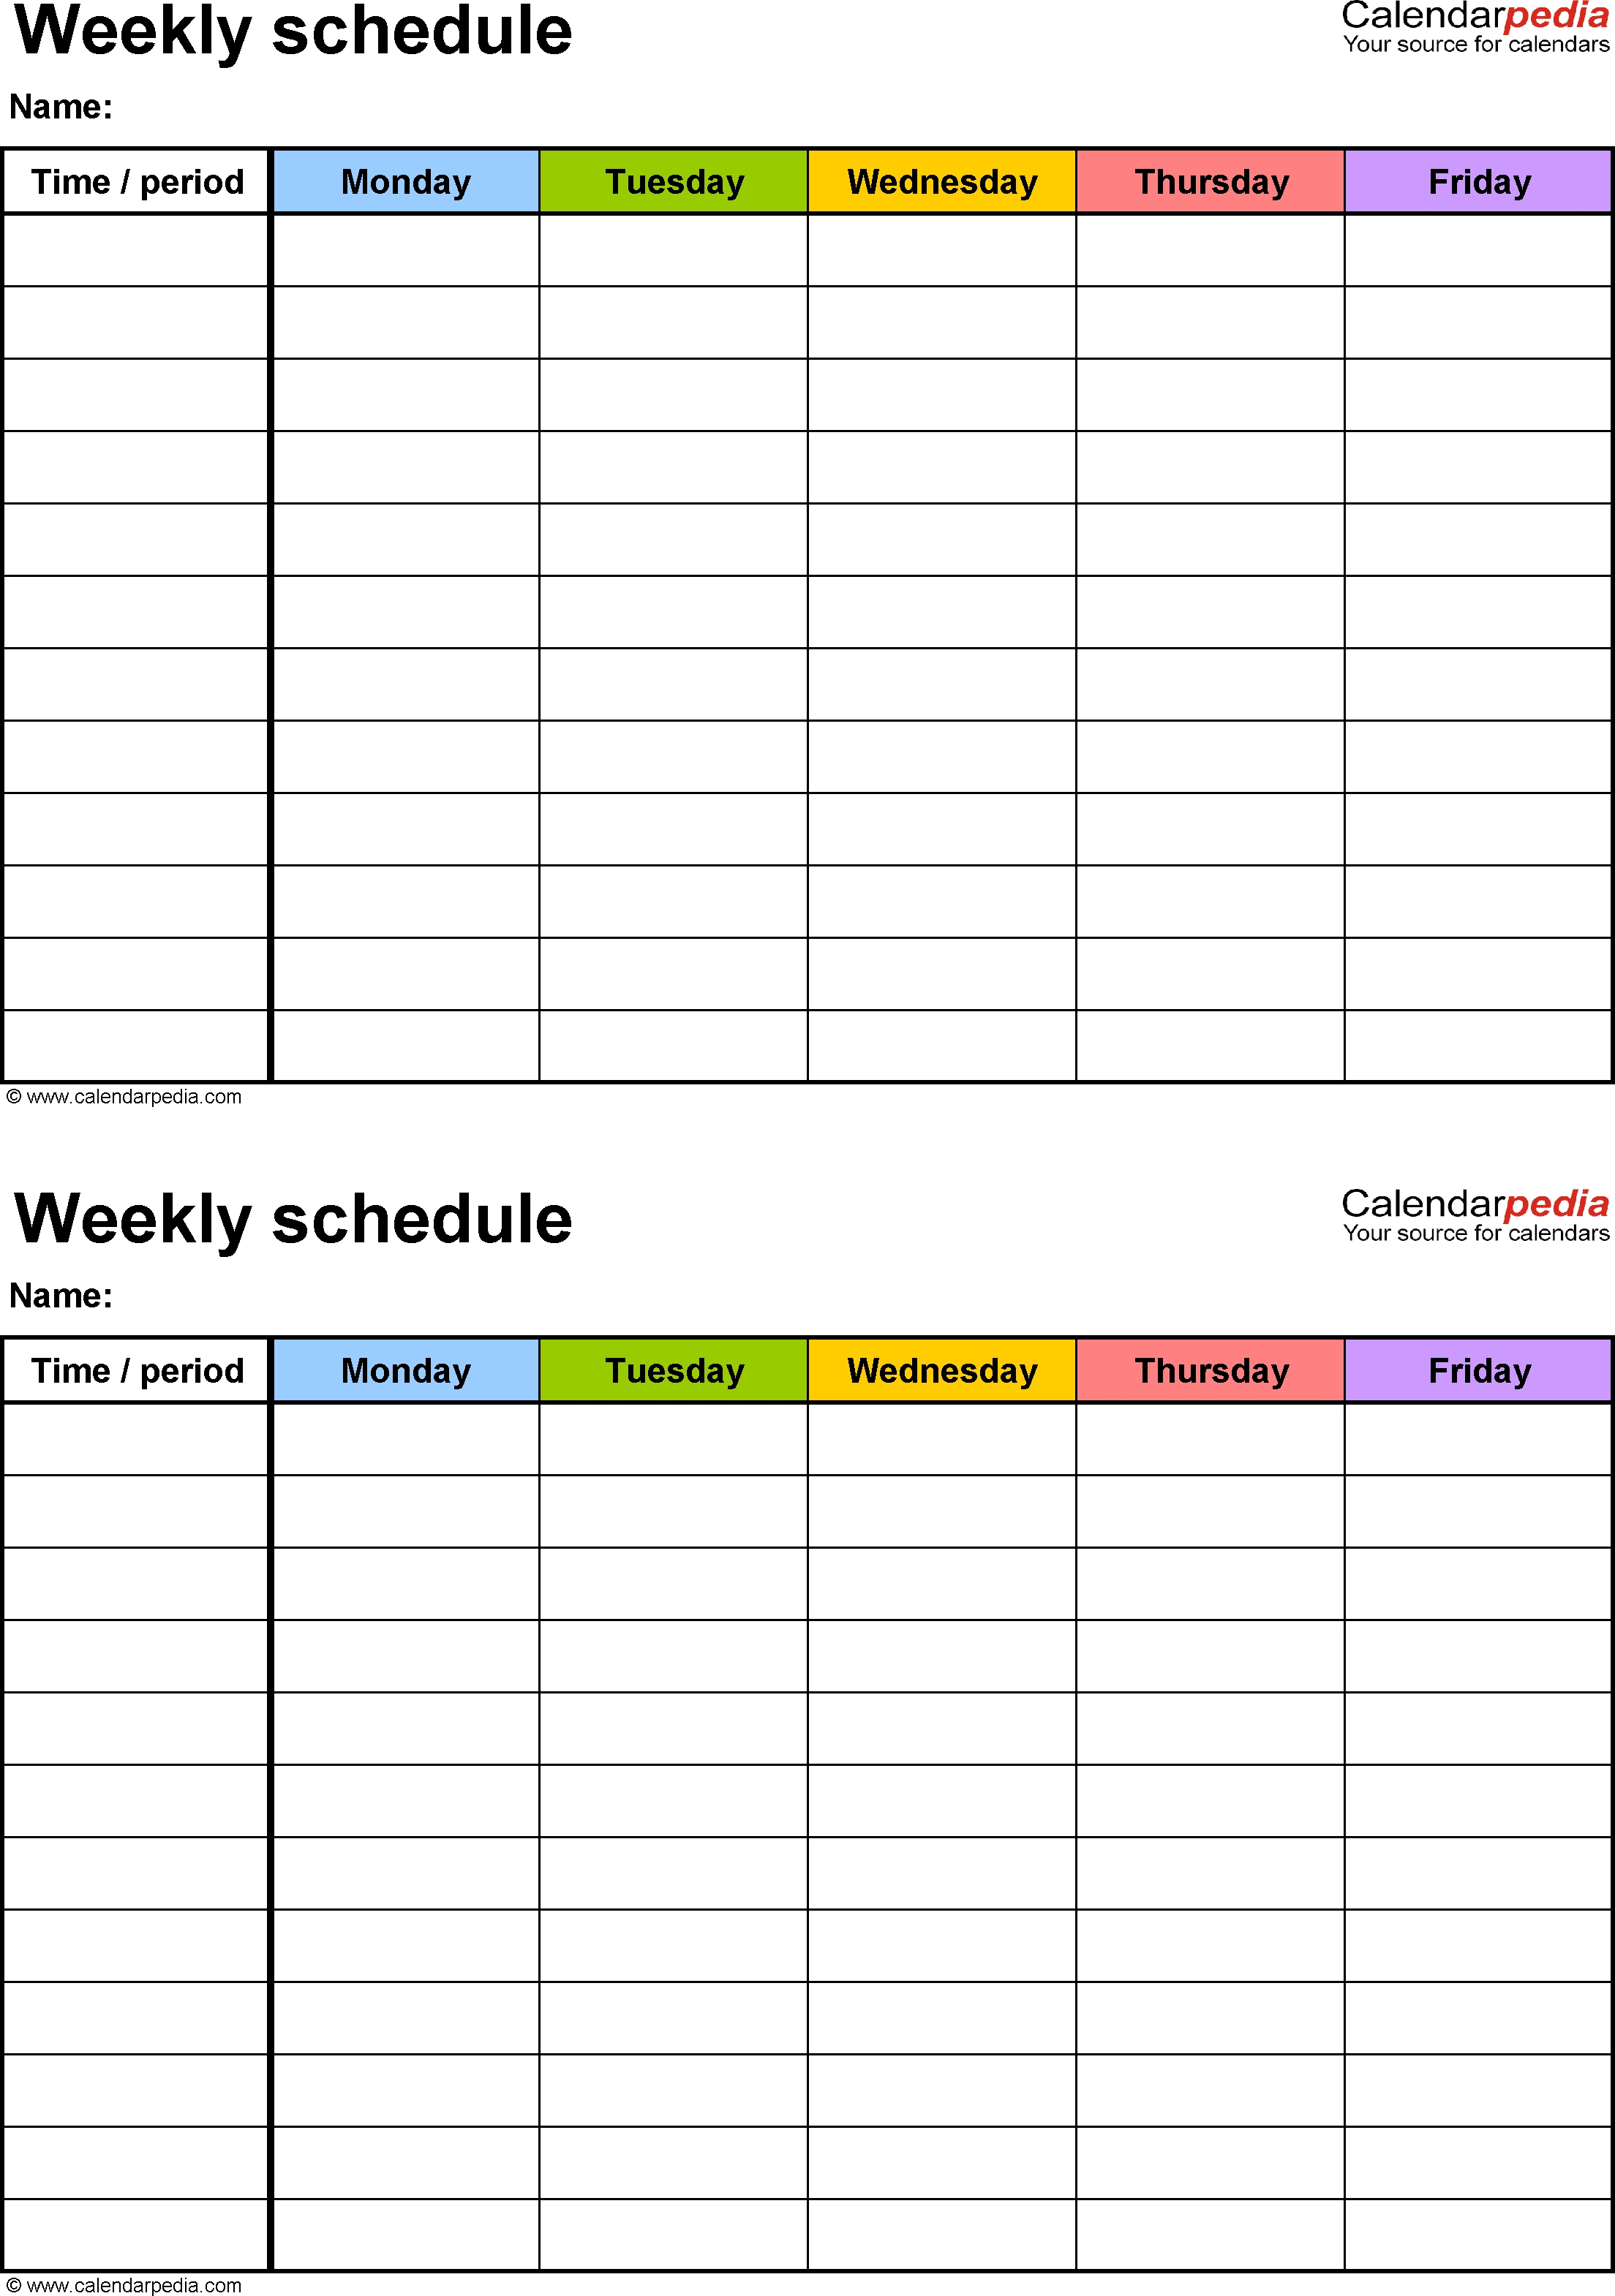 Free Weekly Schedule Templates For Word - 18 Templates Extraordinary Monday To Friday Calendar Template